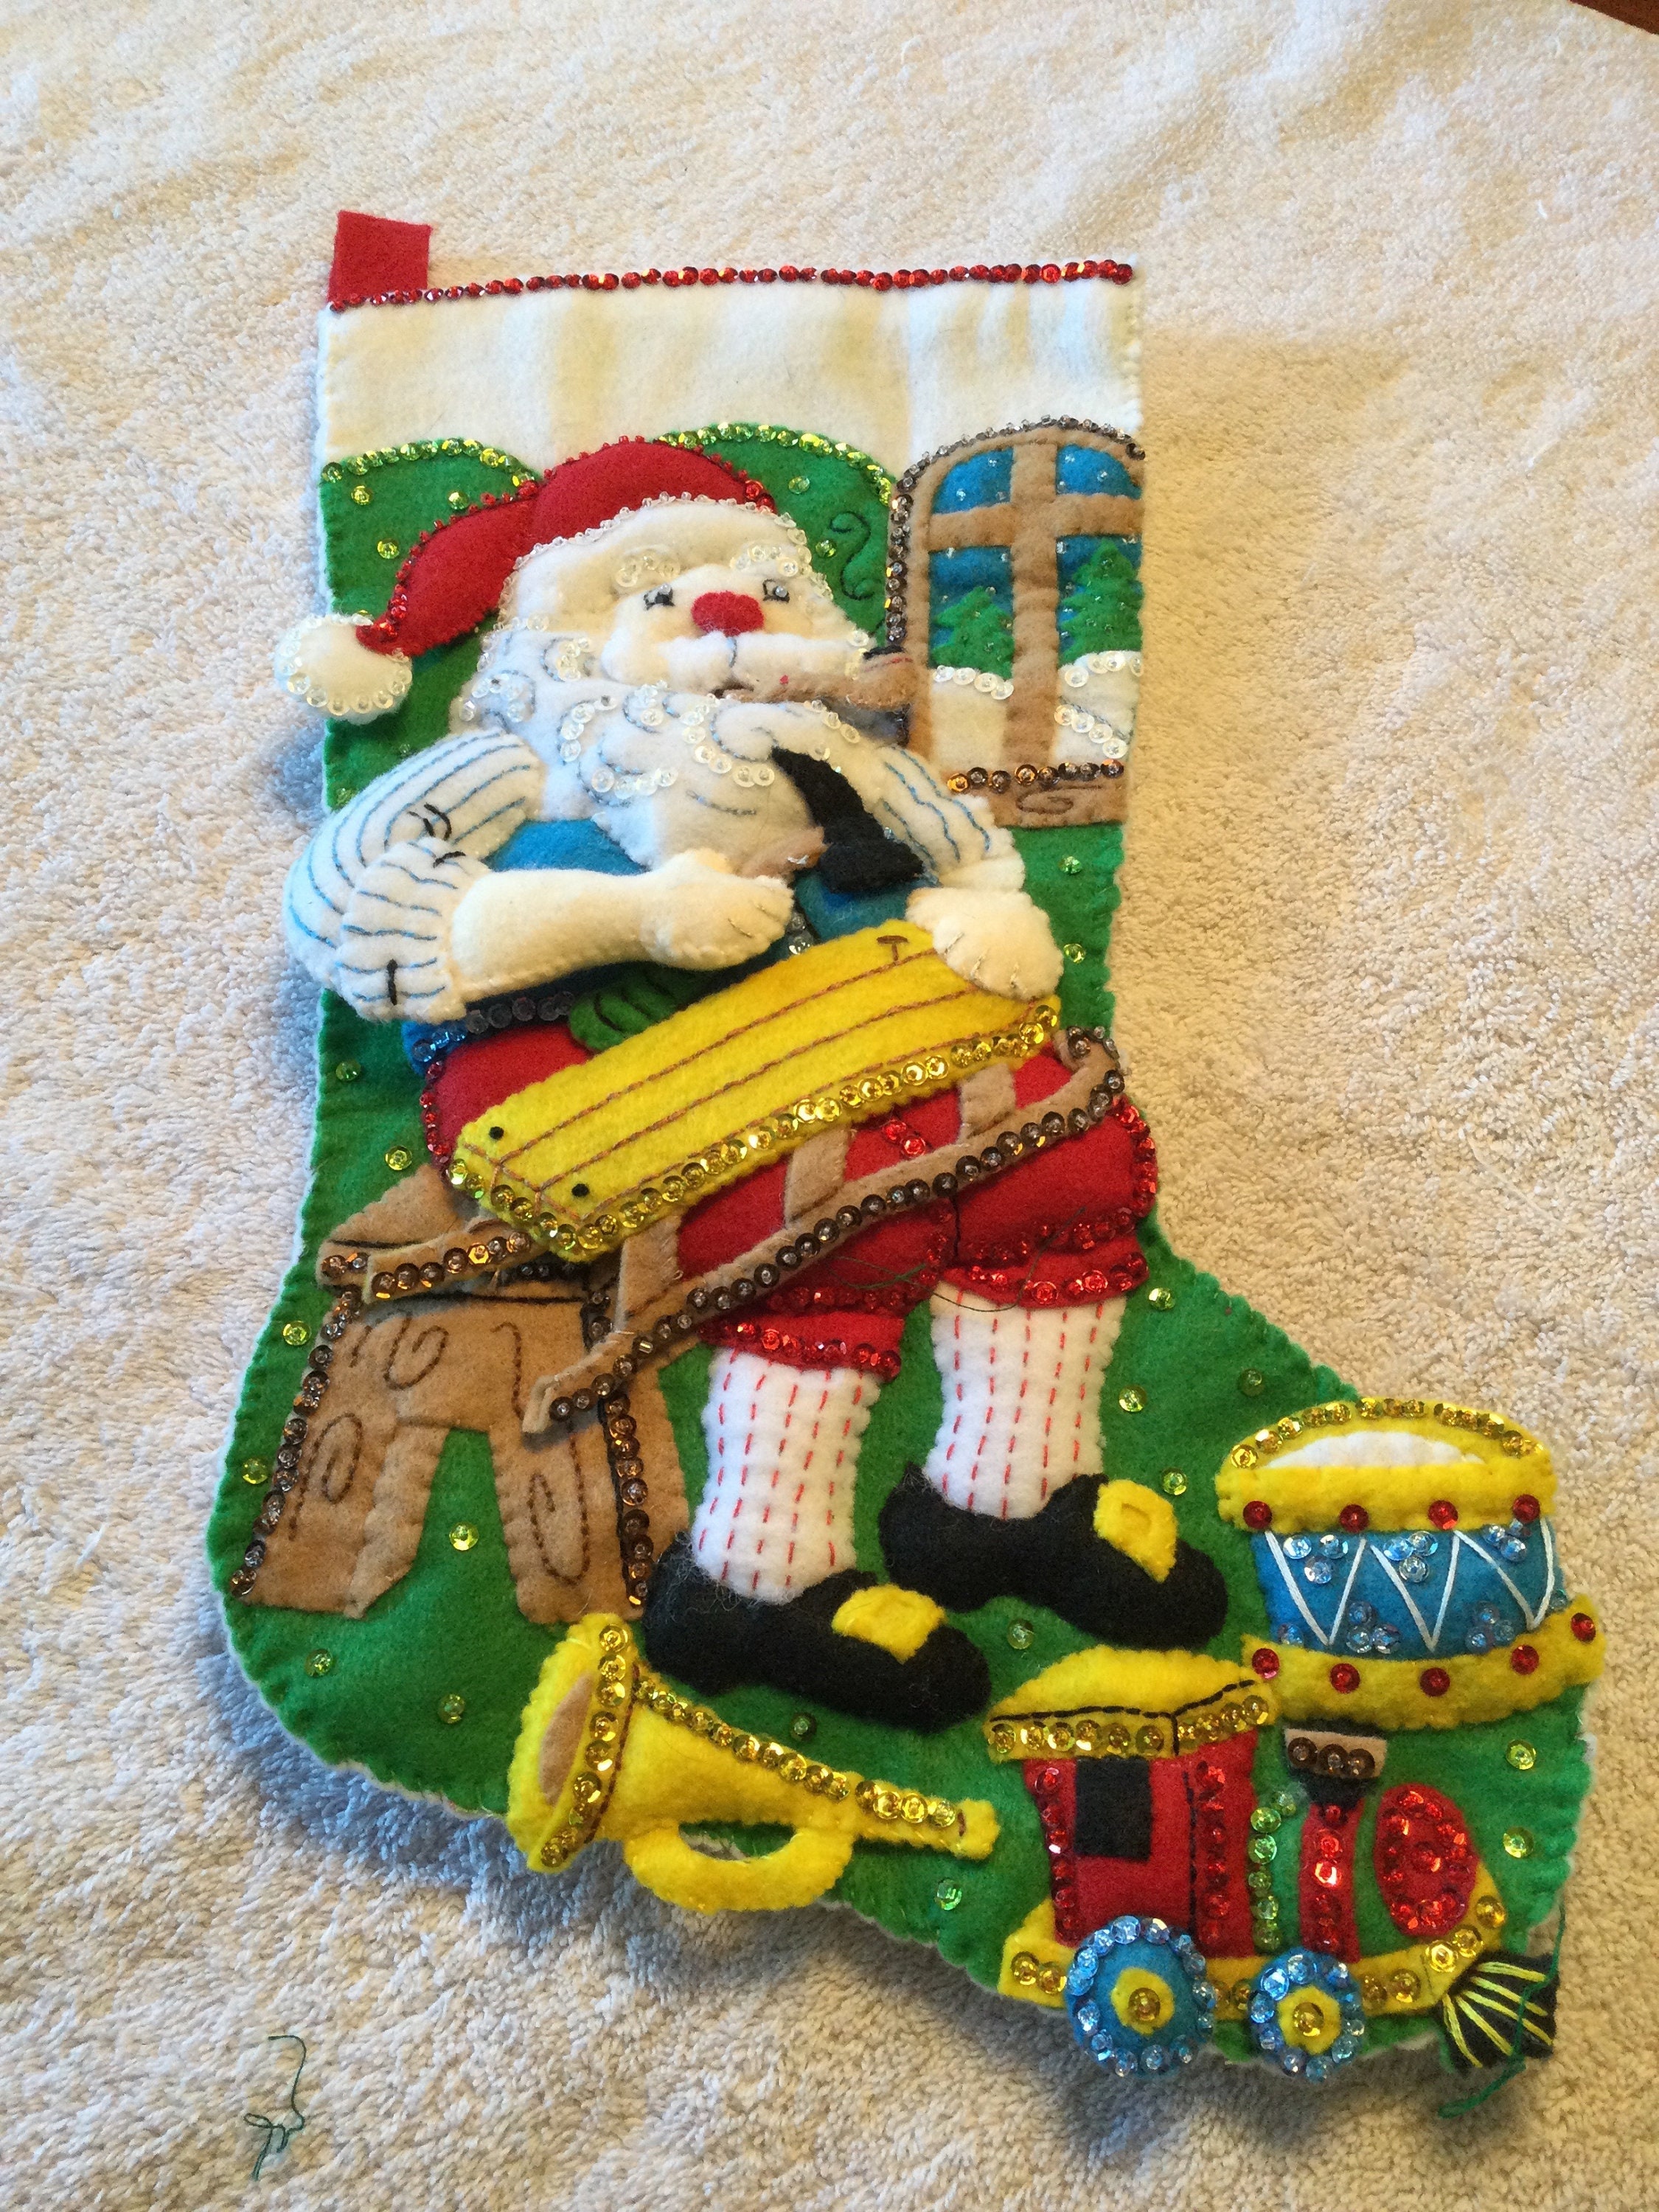 Bucilla stocking finished in time for Christmas! It's all hand work with